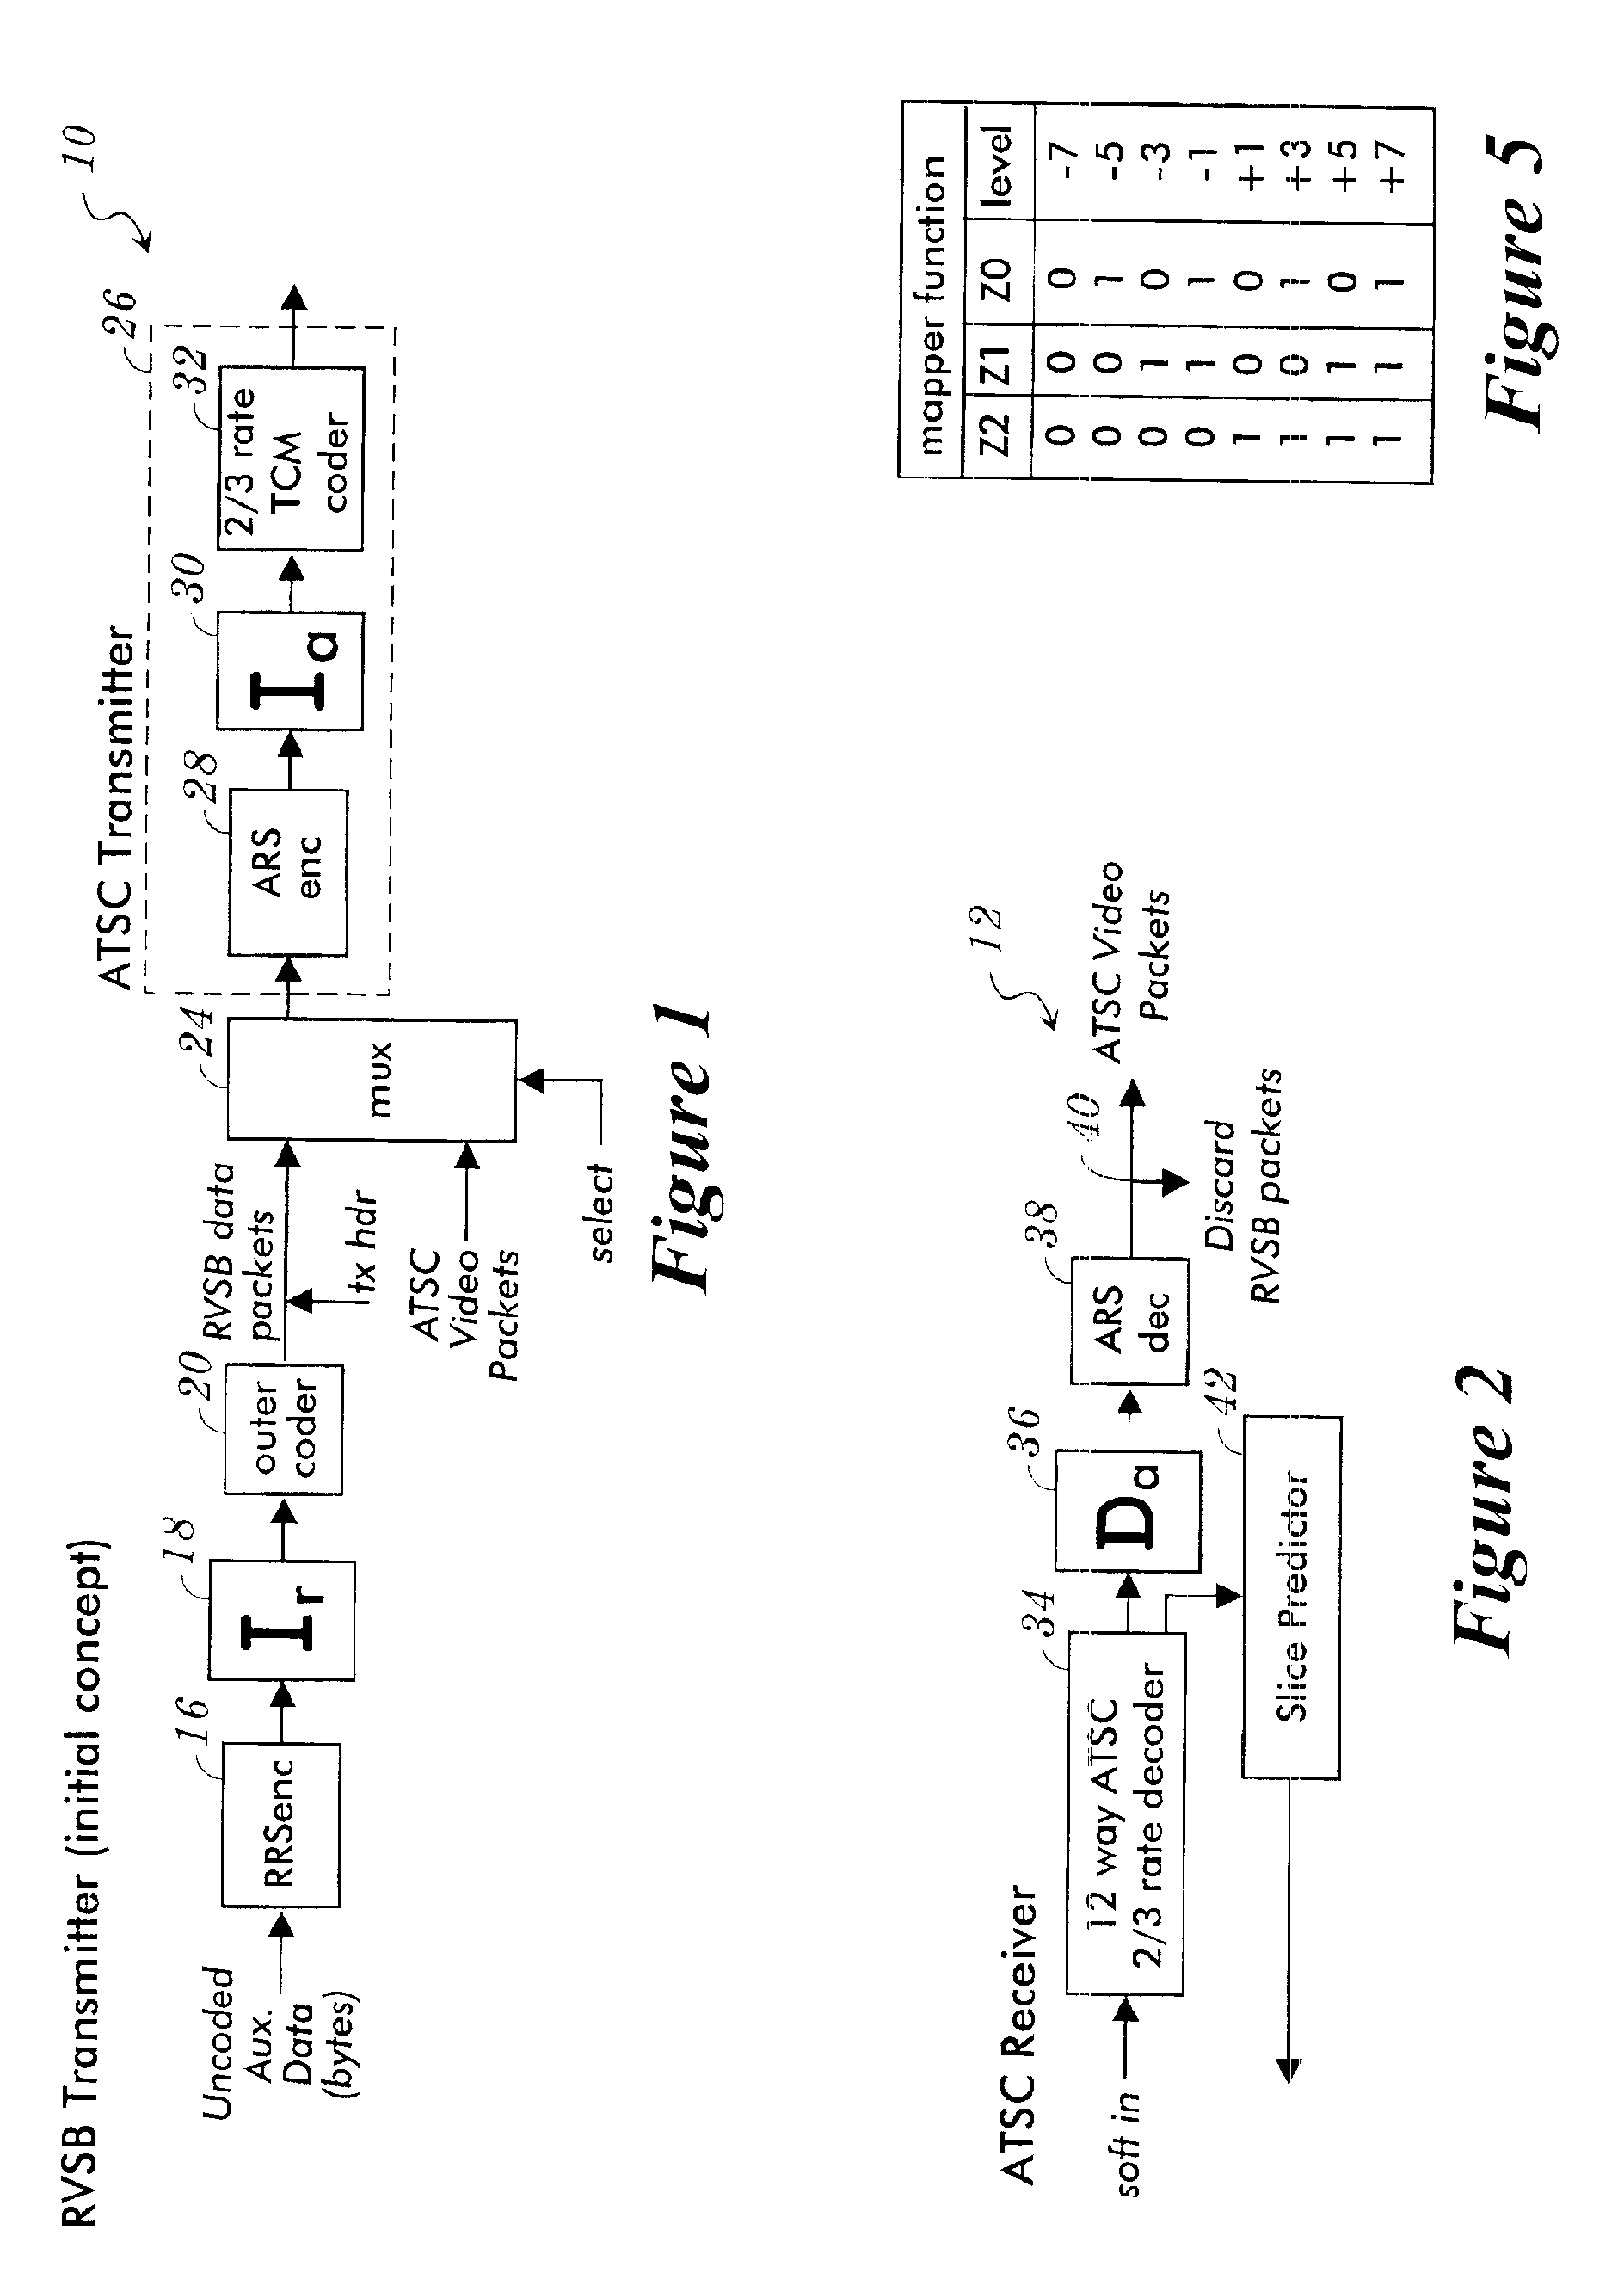 Digital communication system for transmitting and receiving robustly encoded data